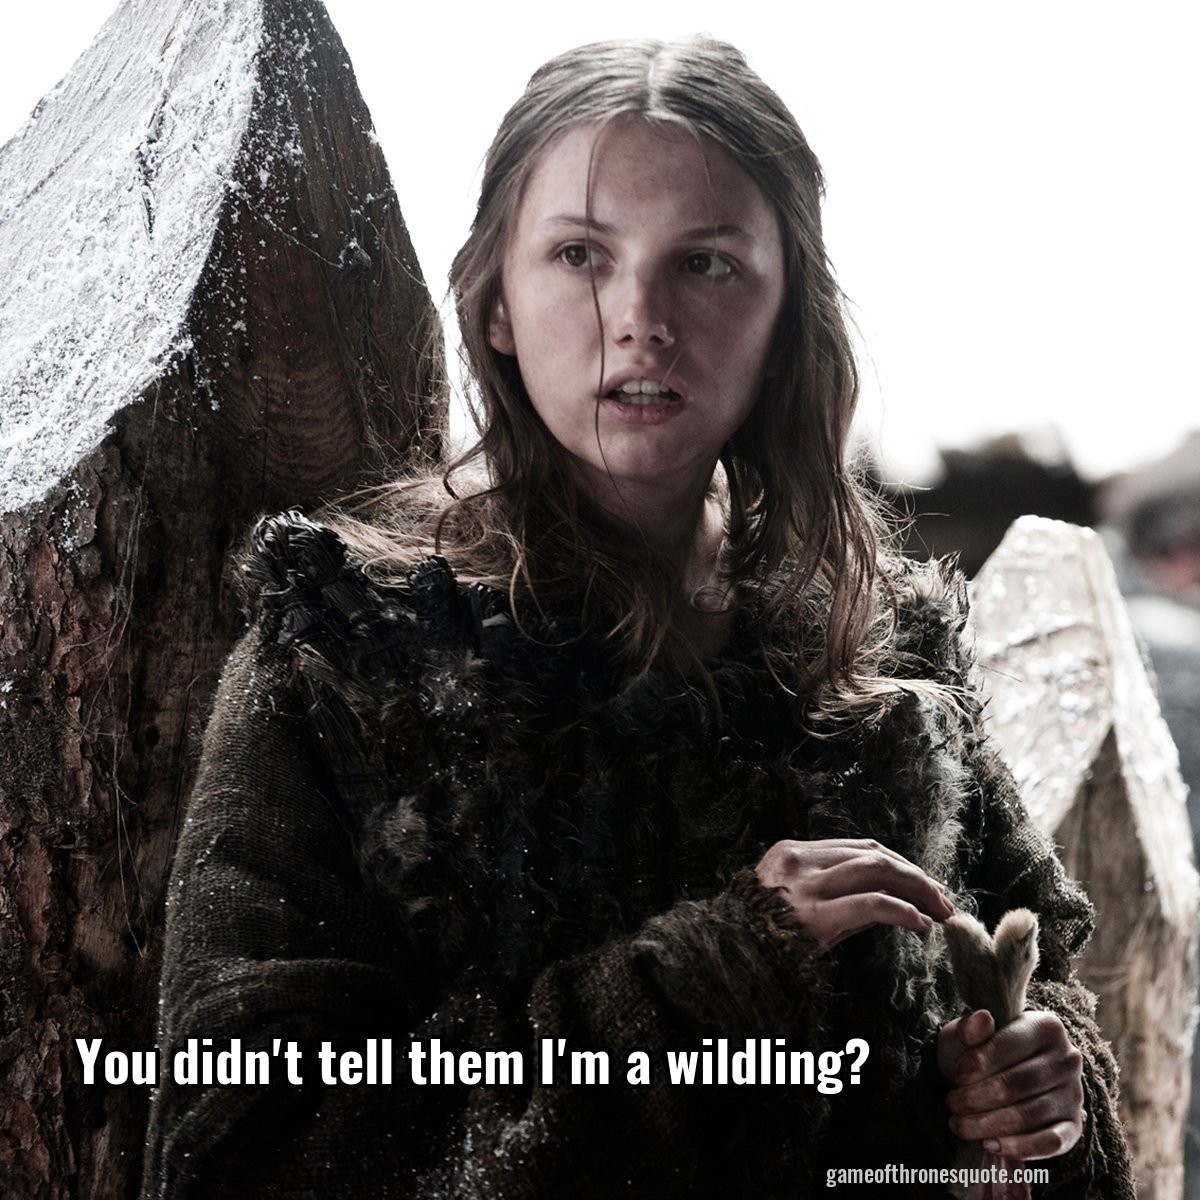 You didn't tell them I'm a wildling?